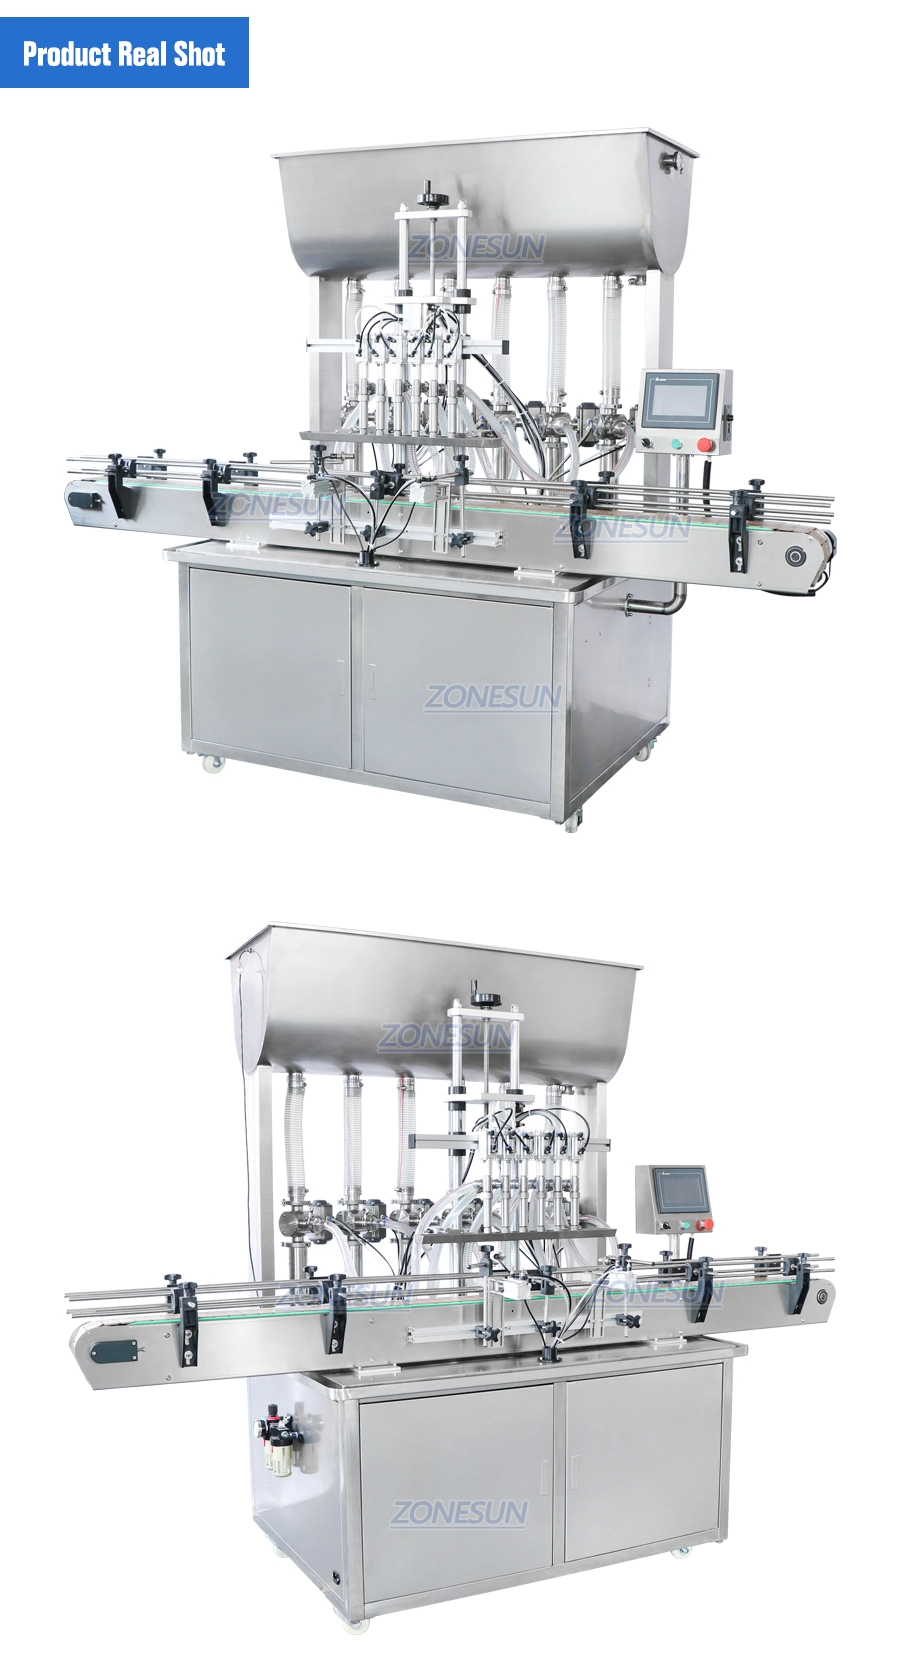 Zonesun Zs-Yt6t-6p Fully Automatic Pneumatic Ketchup Juice Oil Cream Lotion Liquid Paste Filling Machine with Conveyor